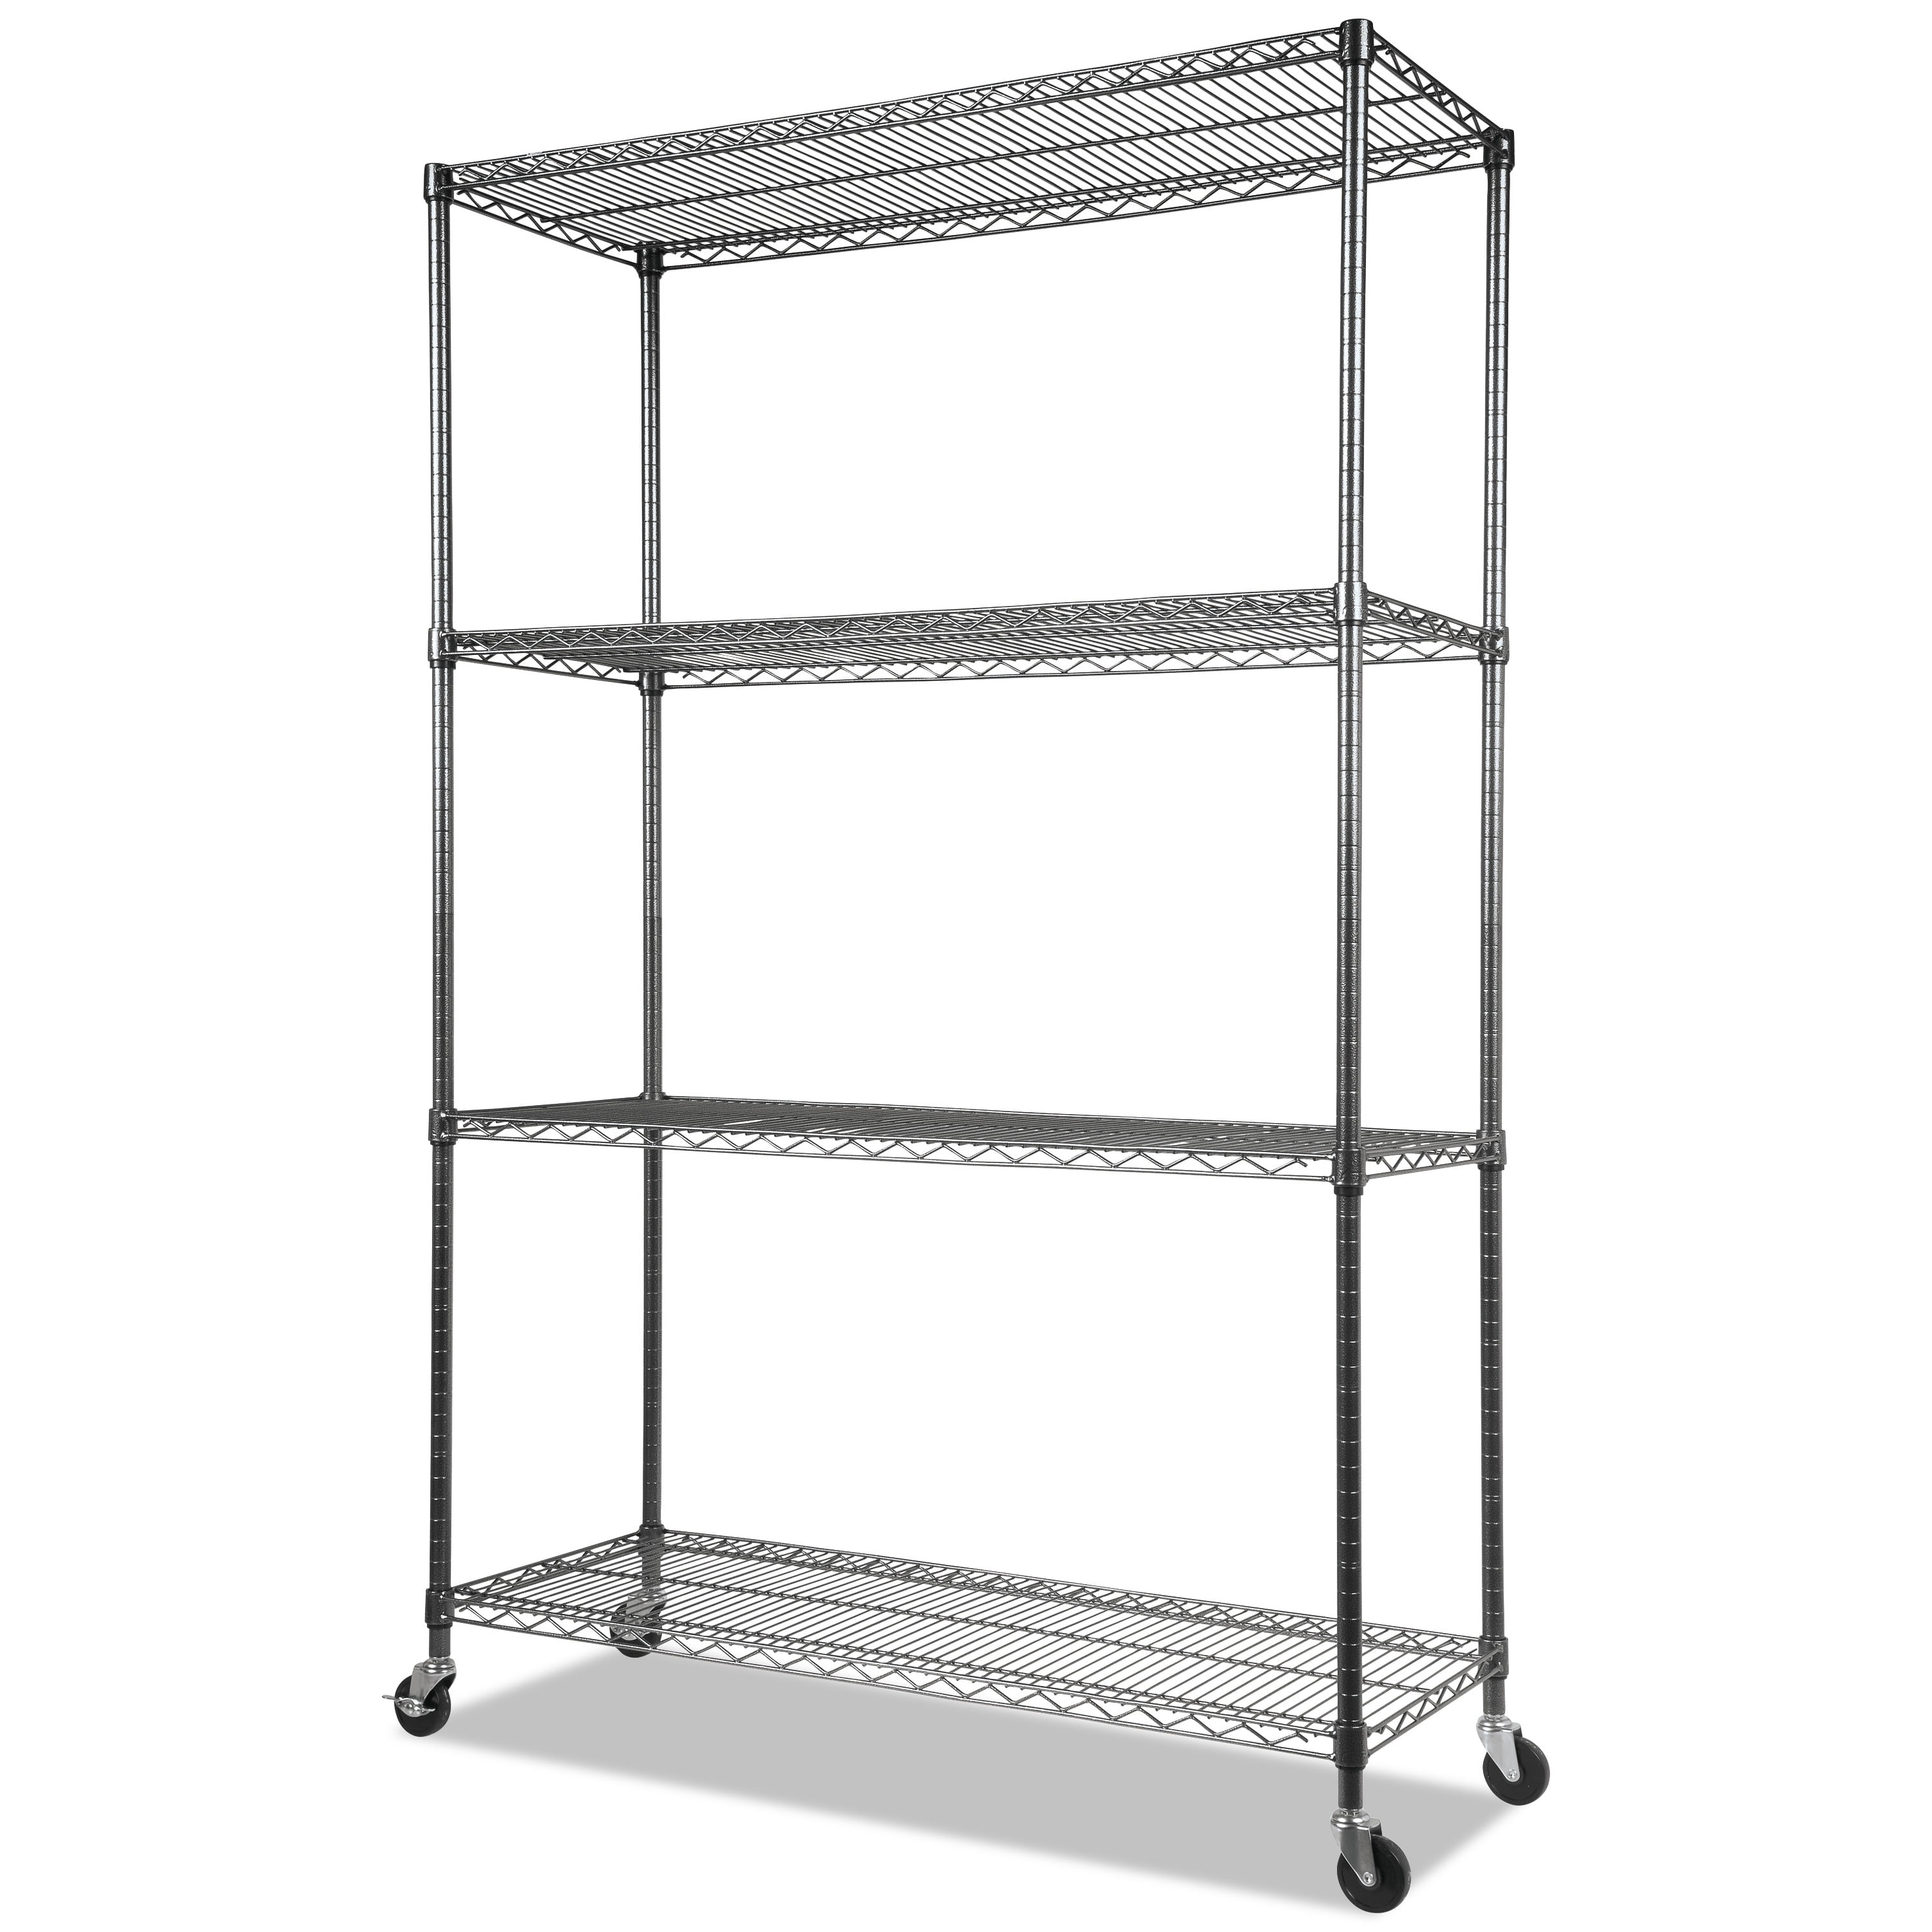 Alera Complete Wire Shelving Unit With, 72 W Shelving Unit